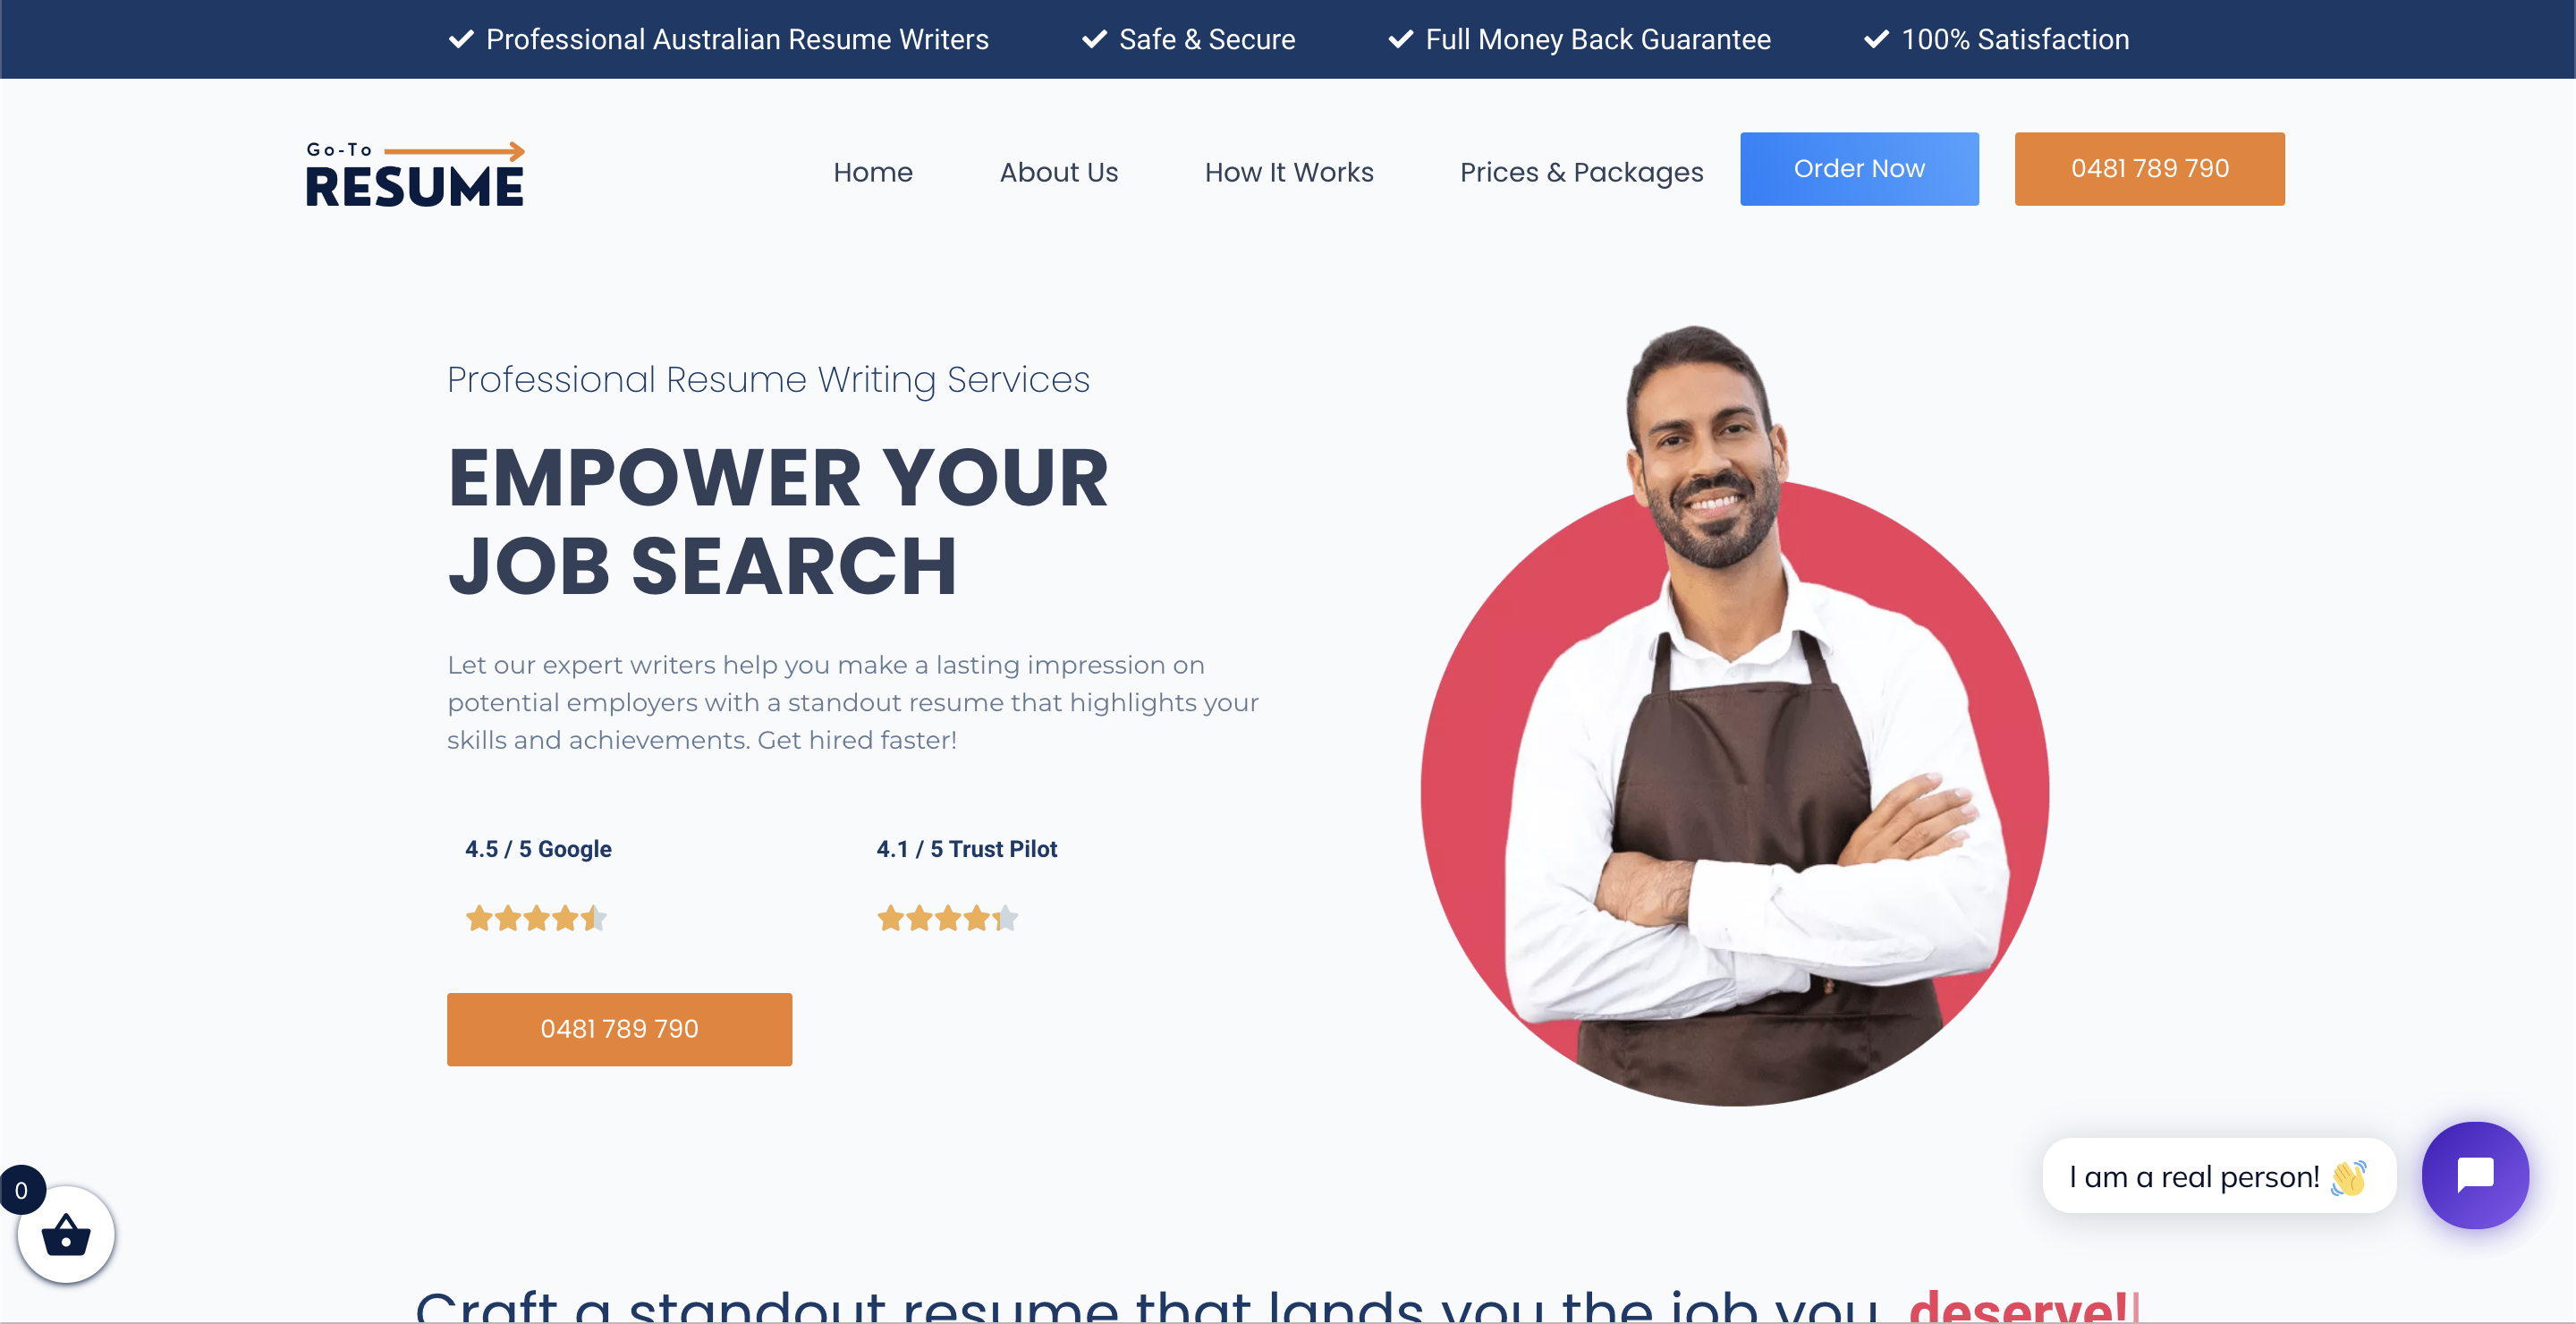 Go-to Resume - Professional Services and Online Ecommerce Website Design